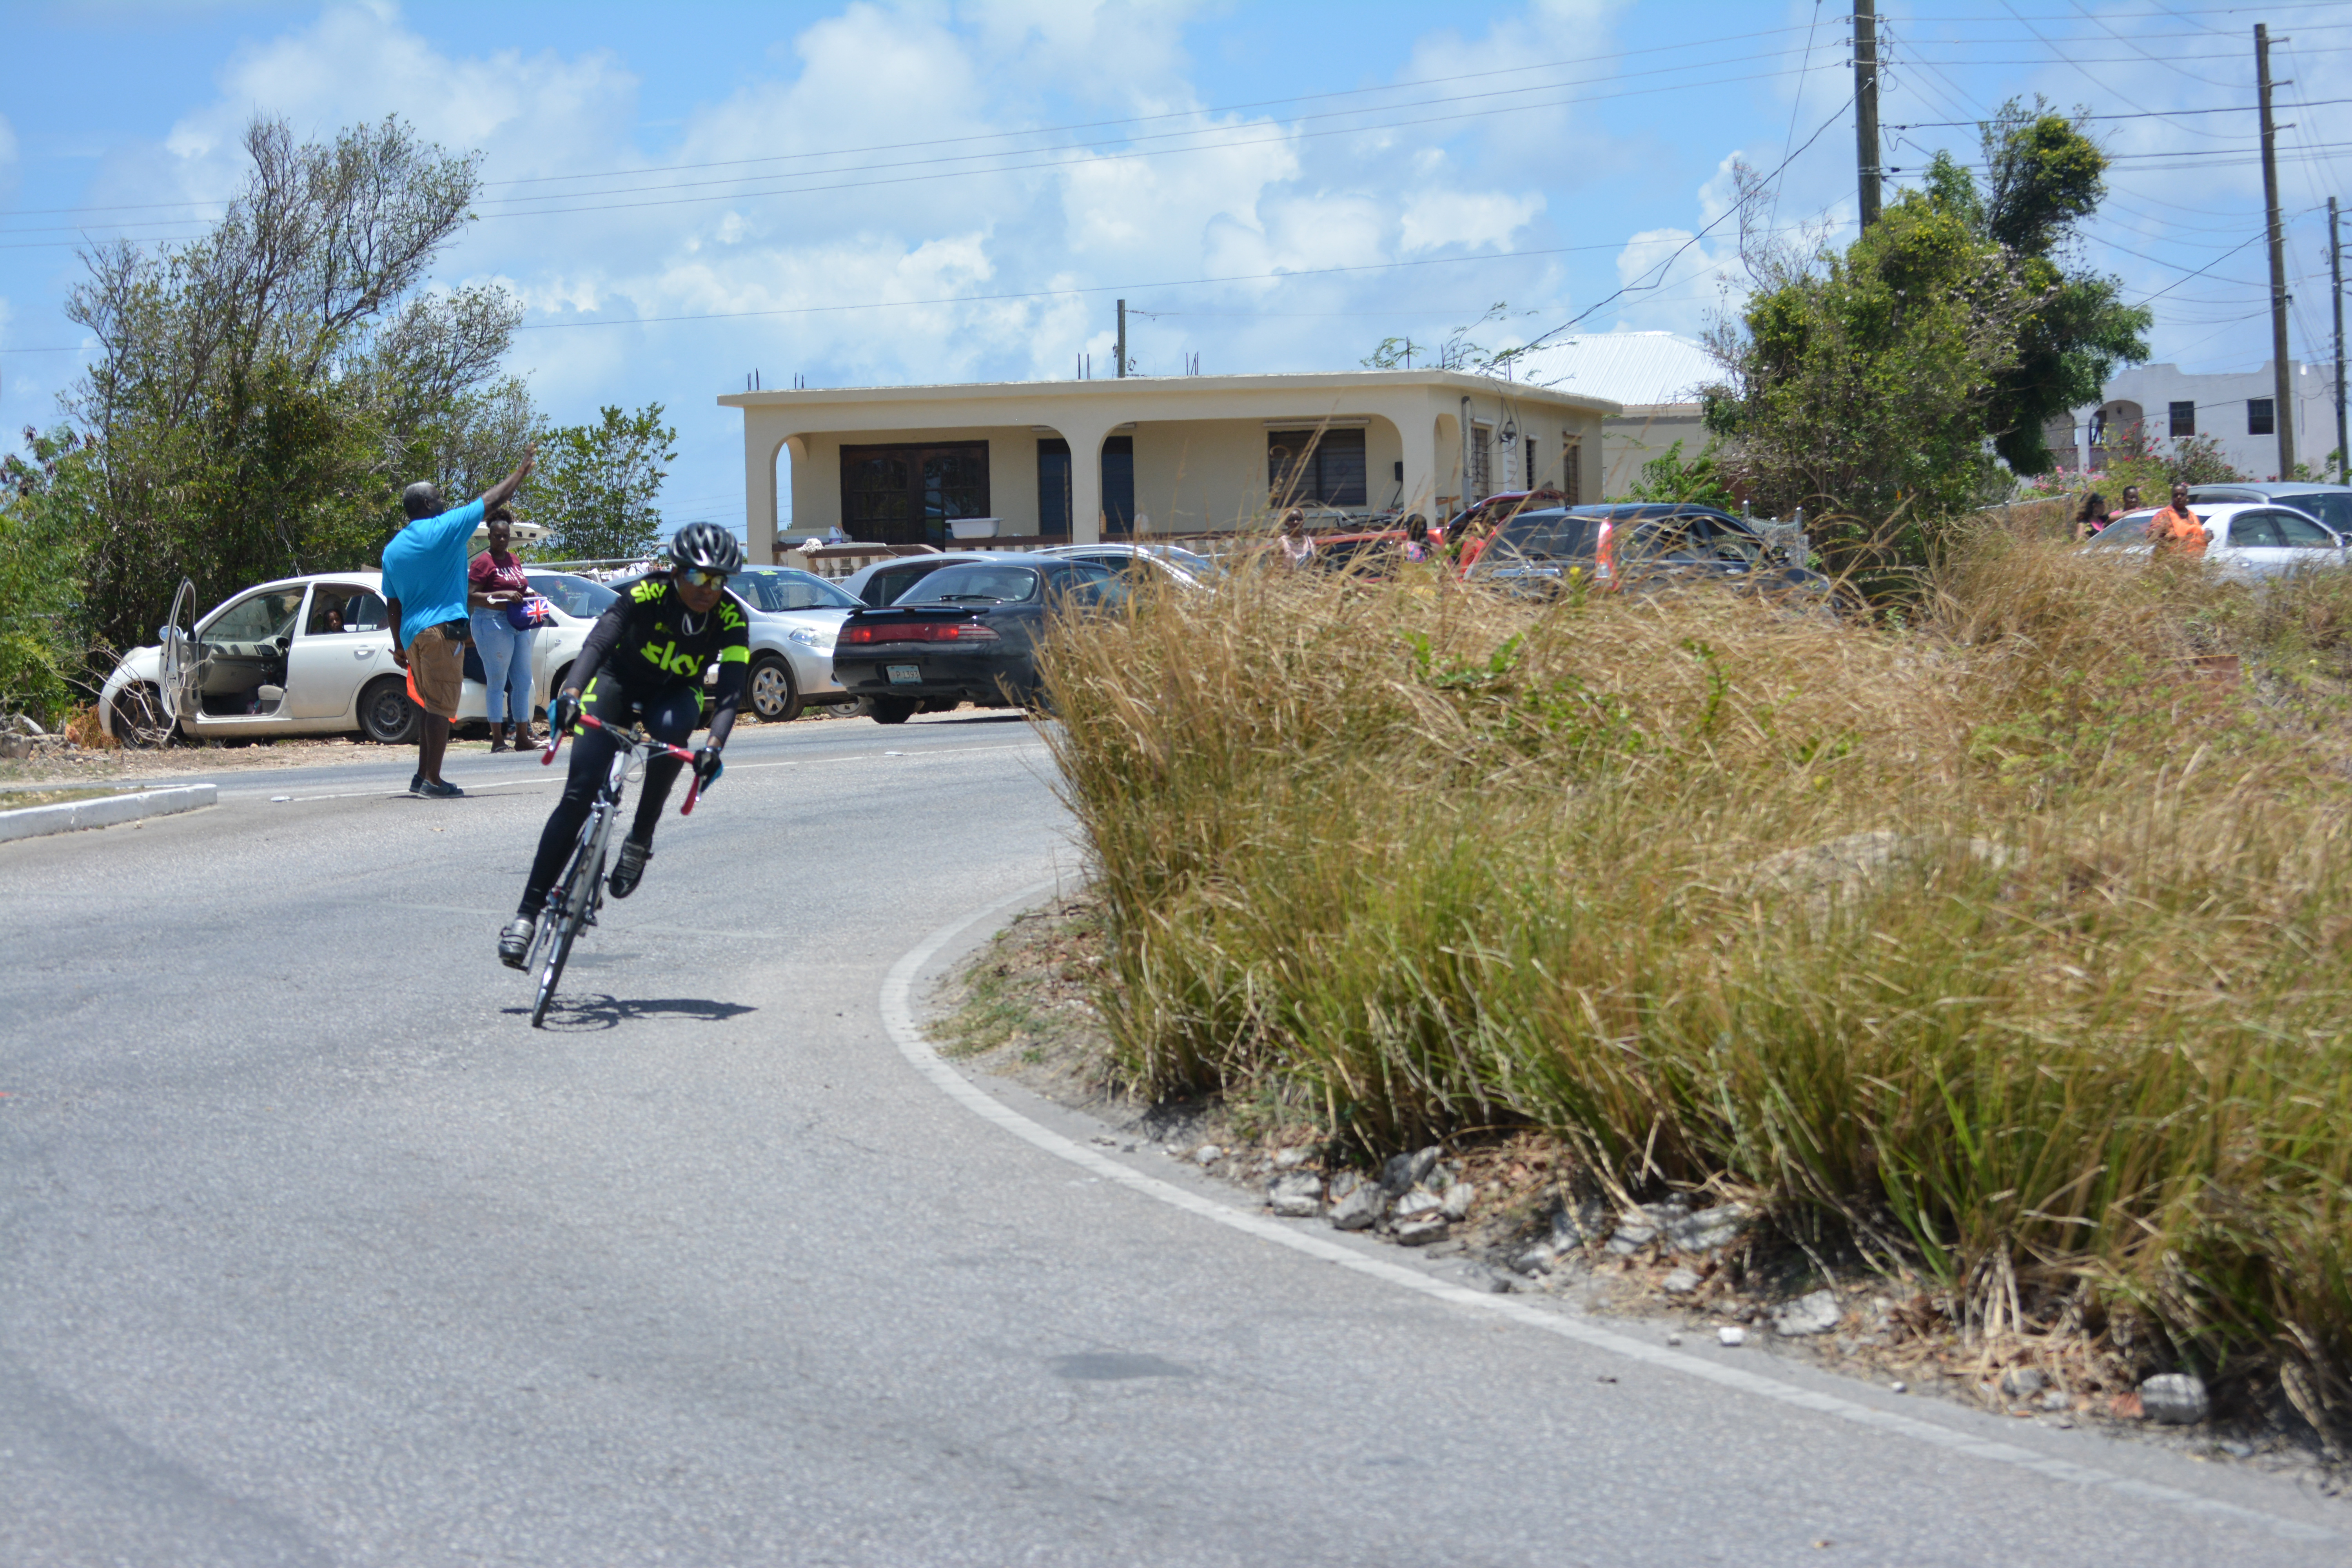 20th John T. Memorial Cycling Race, in Anguilla, July 21, 2019